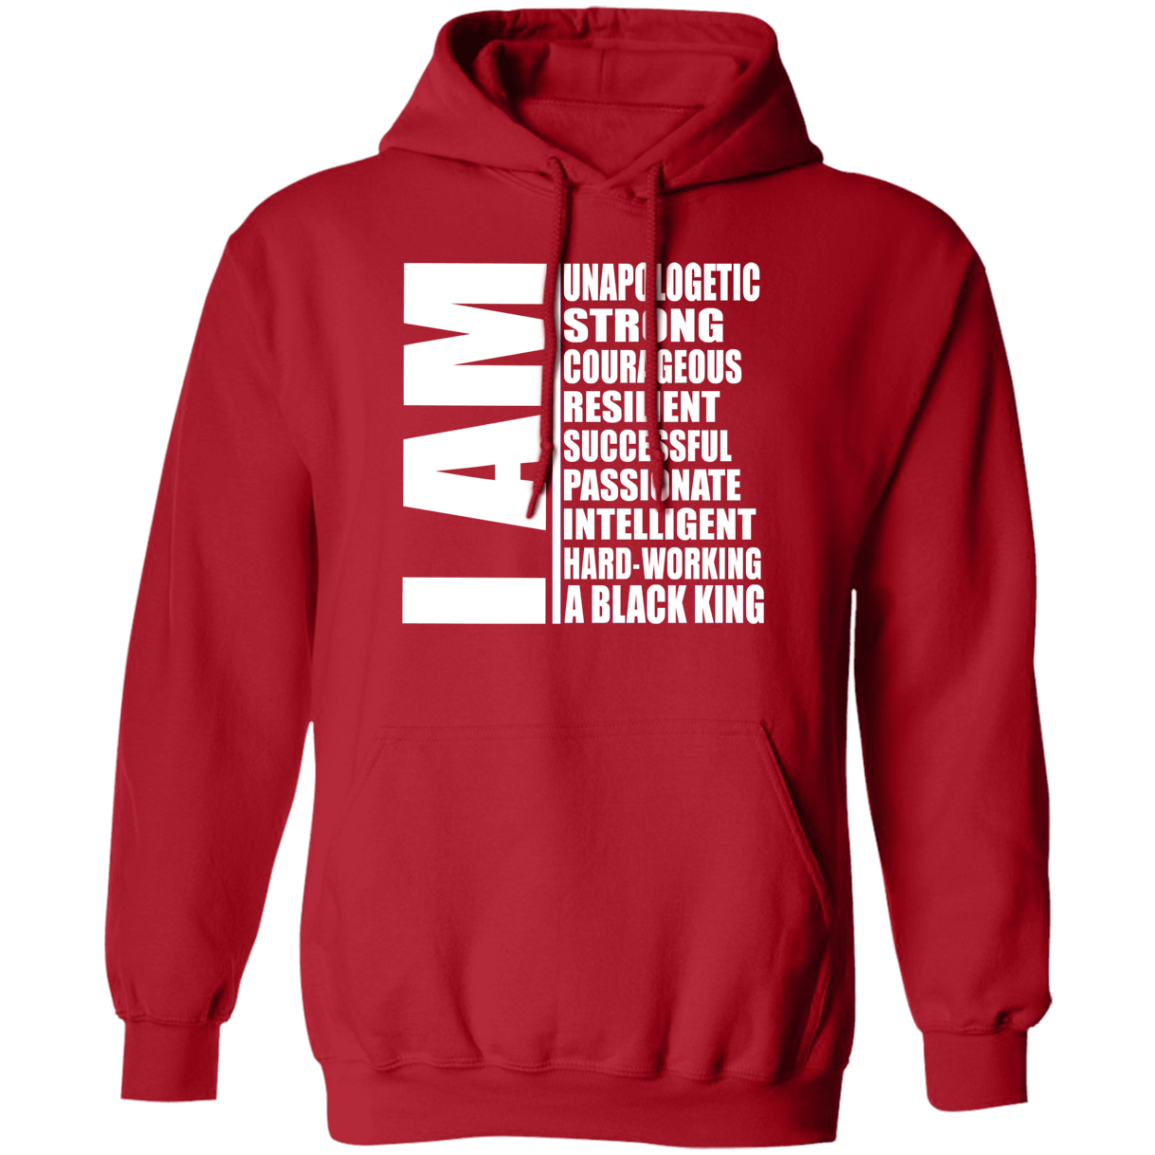 I AM Pullover Hoodie